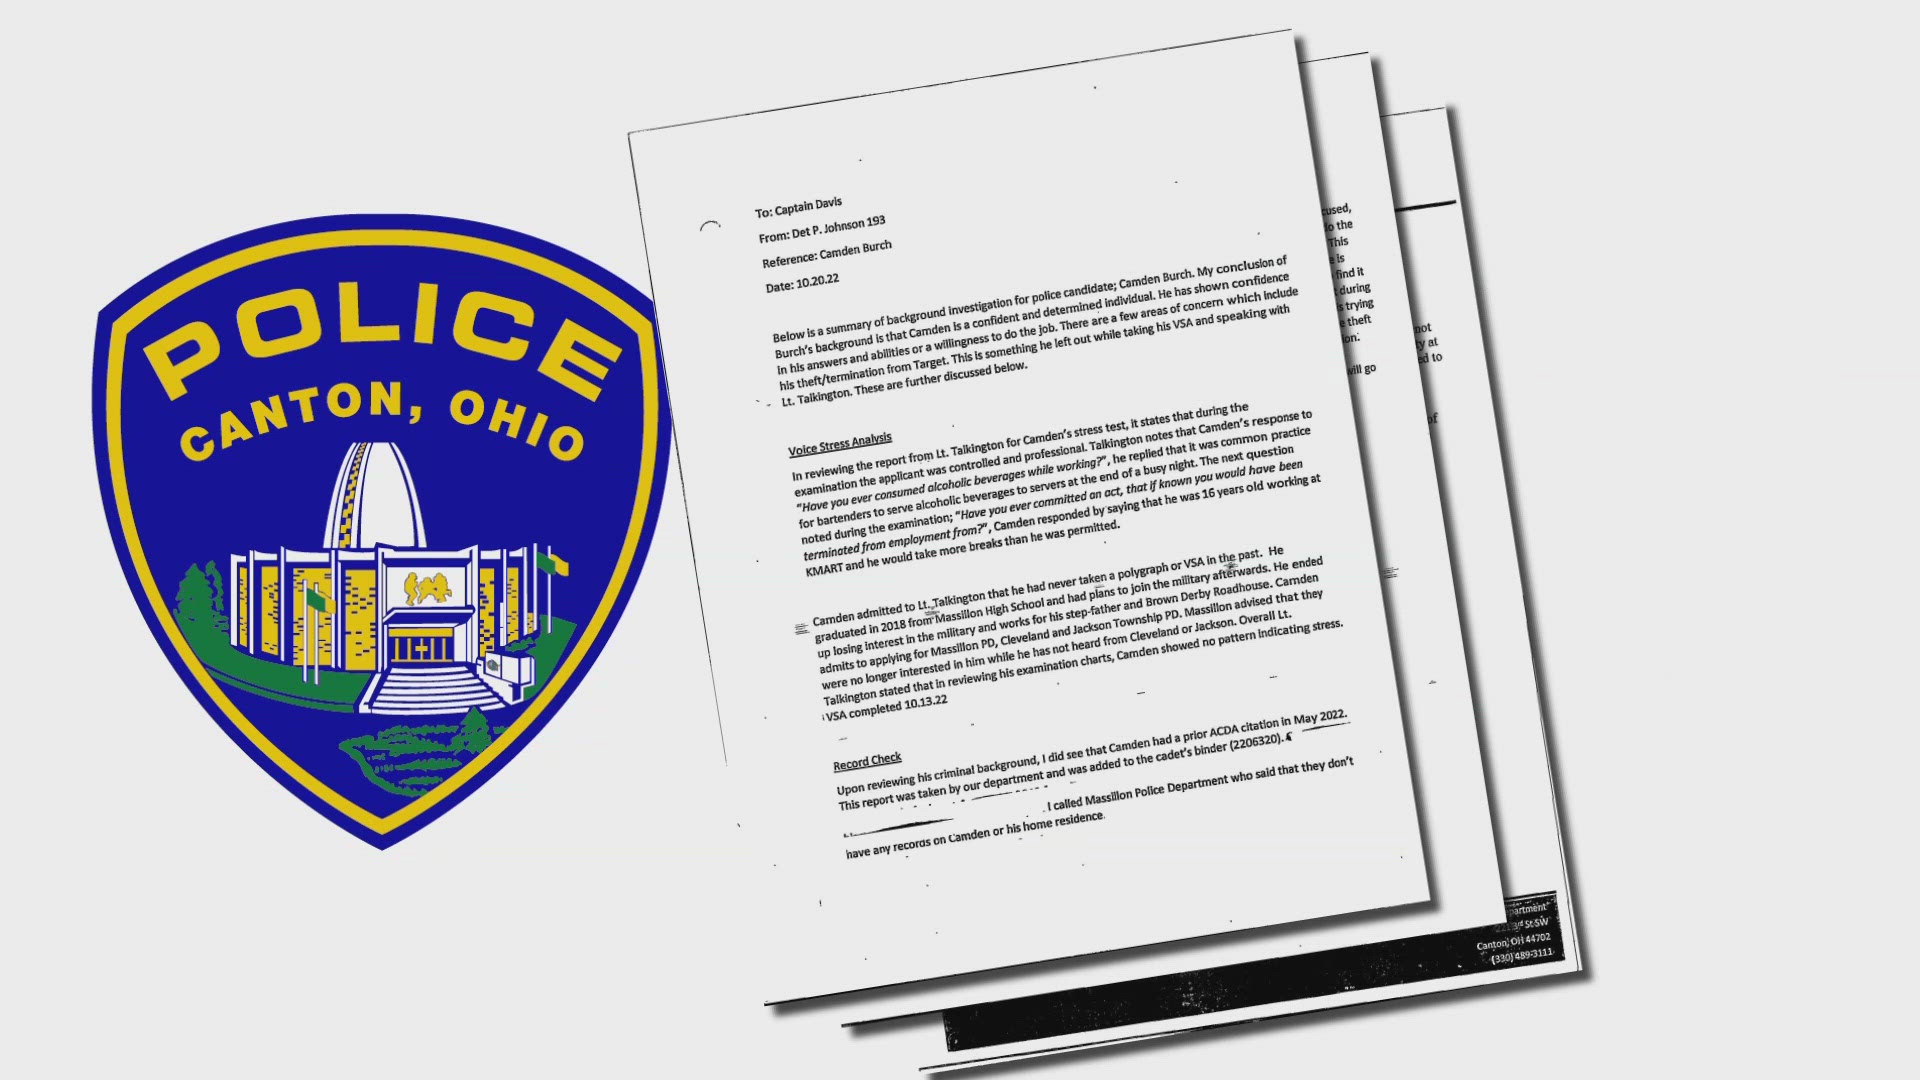 Both officers had only been serving on the streets of Canton for nine months. An investigator expressed concern about one of them during the hiring process.